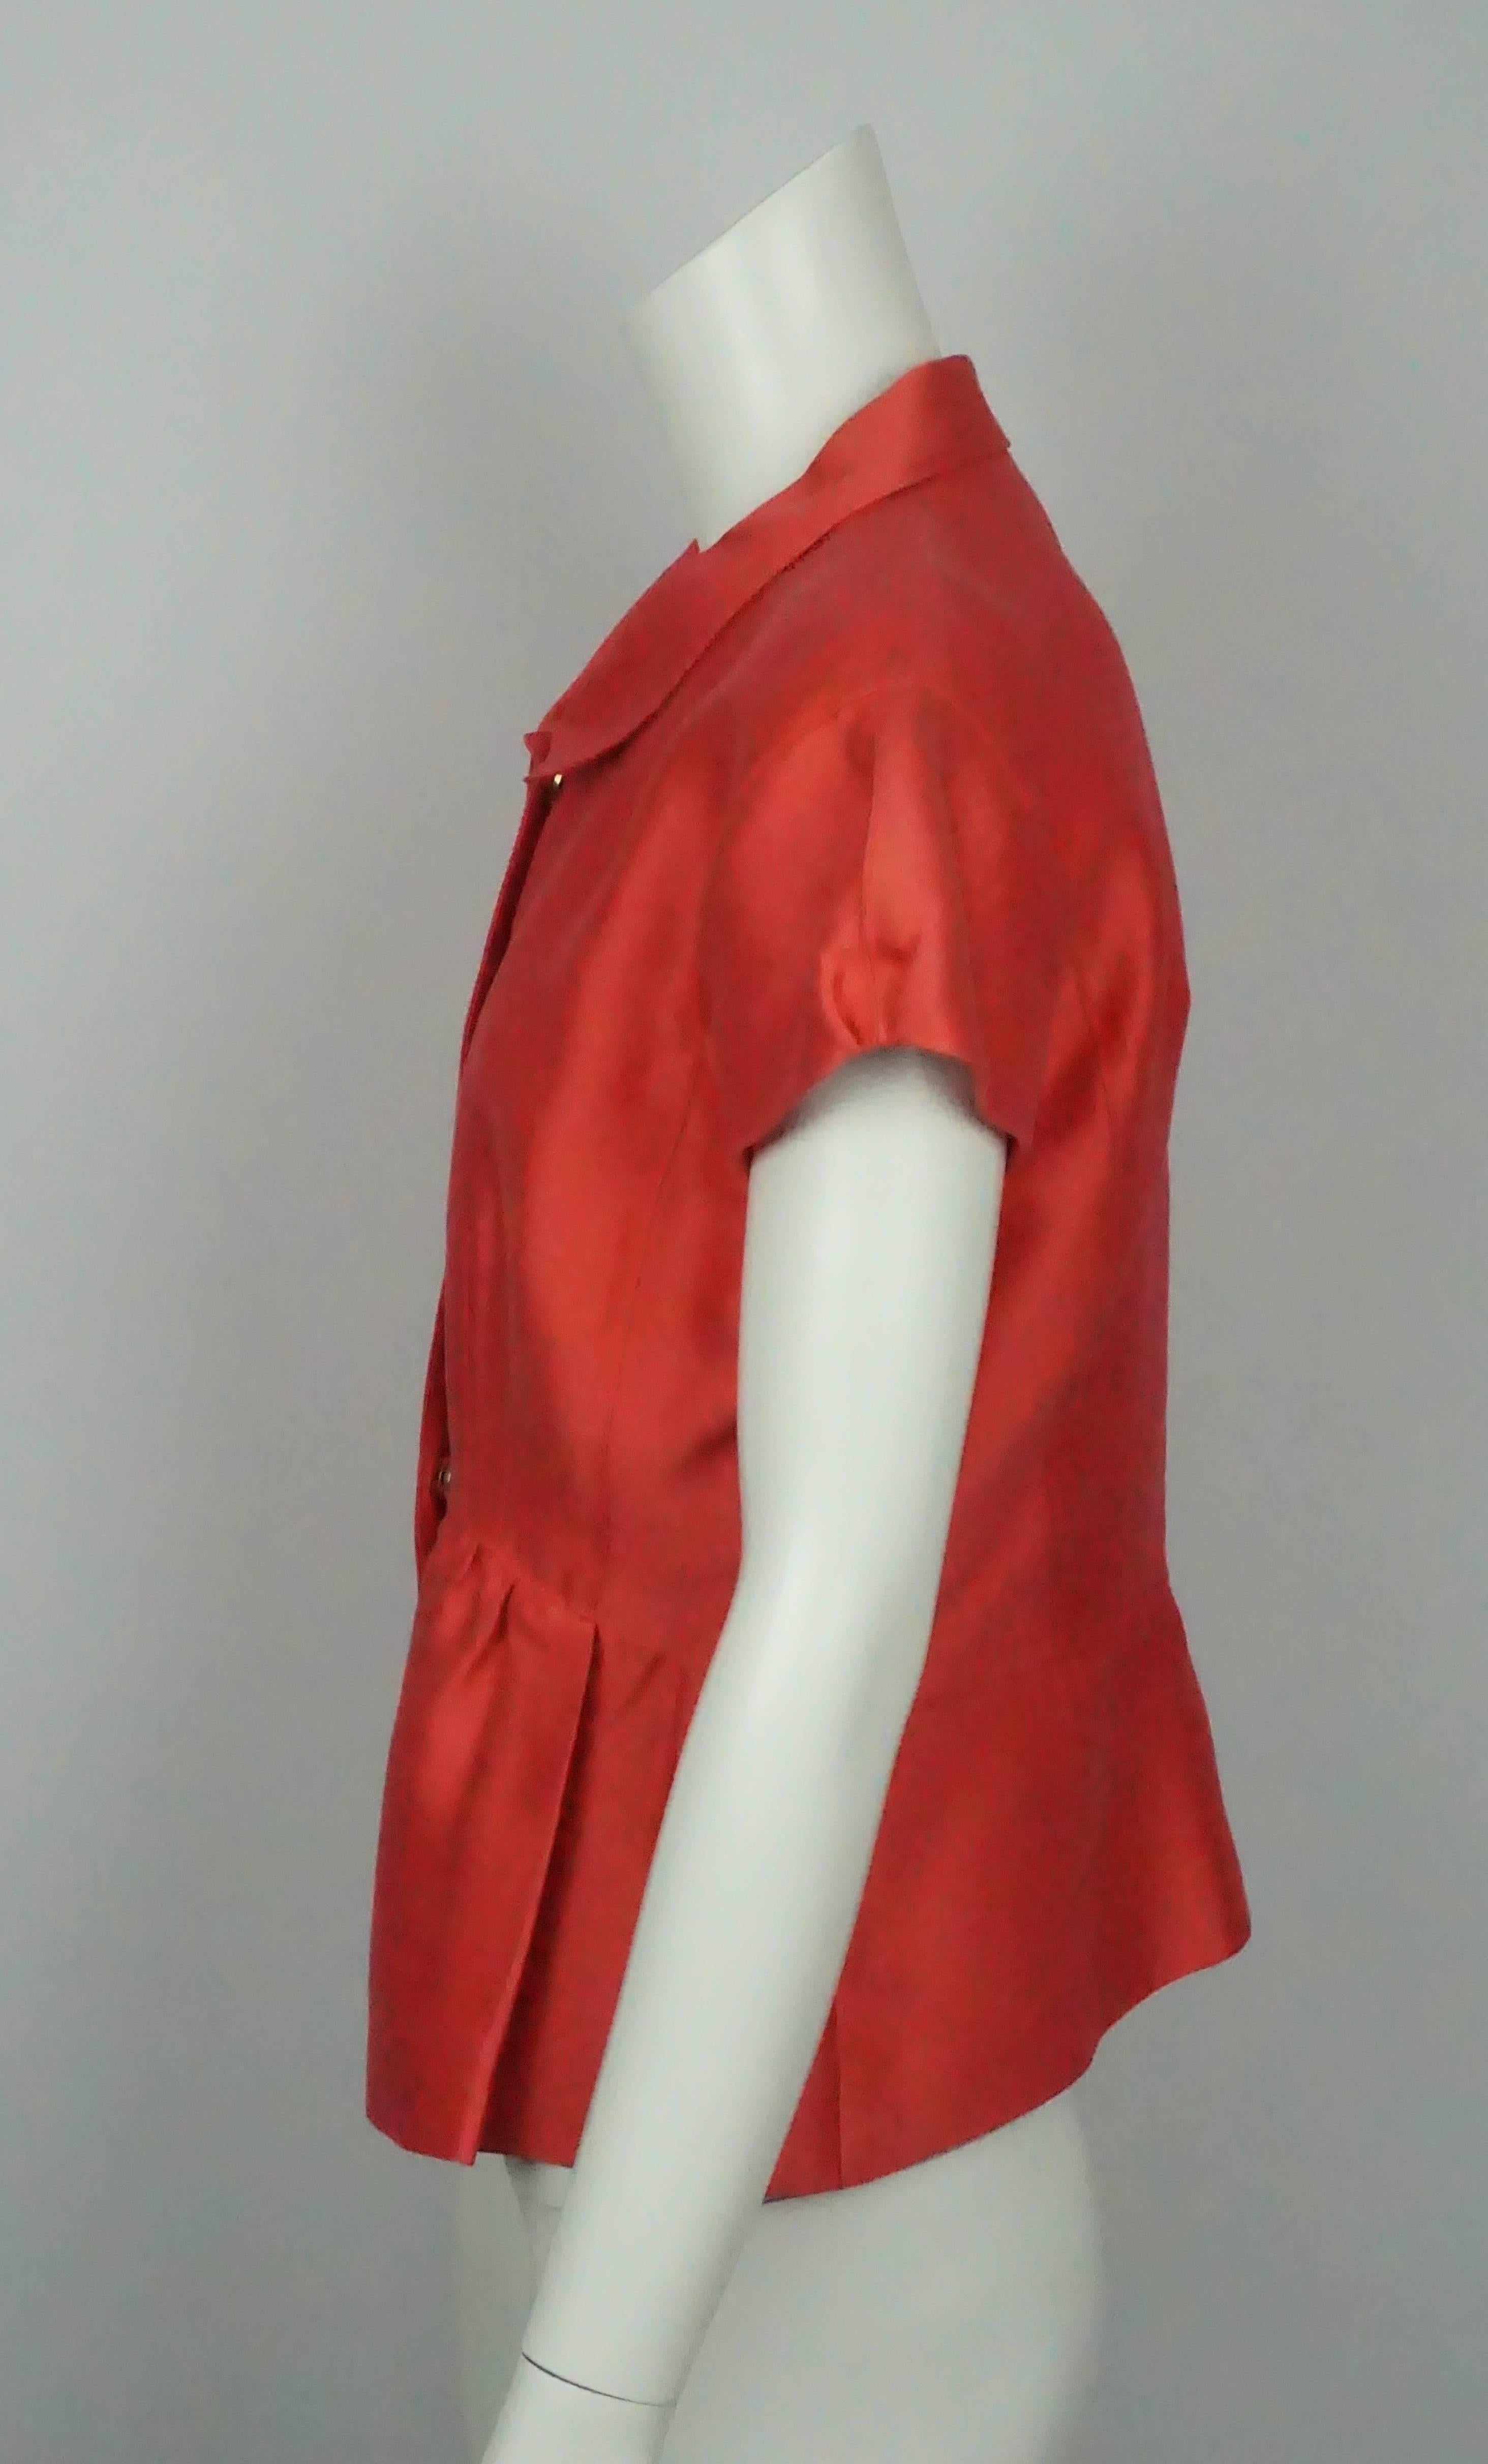 Oscar De La Renta Coral Cotton/Silk Blend S/S Top - 8 This classic Oscar cotton top is in excellent  condition. The top has a cap sleeve and a slight peplum to it. There are five metal snaps that are hidden down the front center of the jacket. This